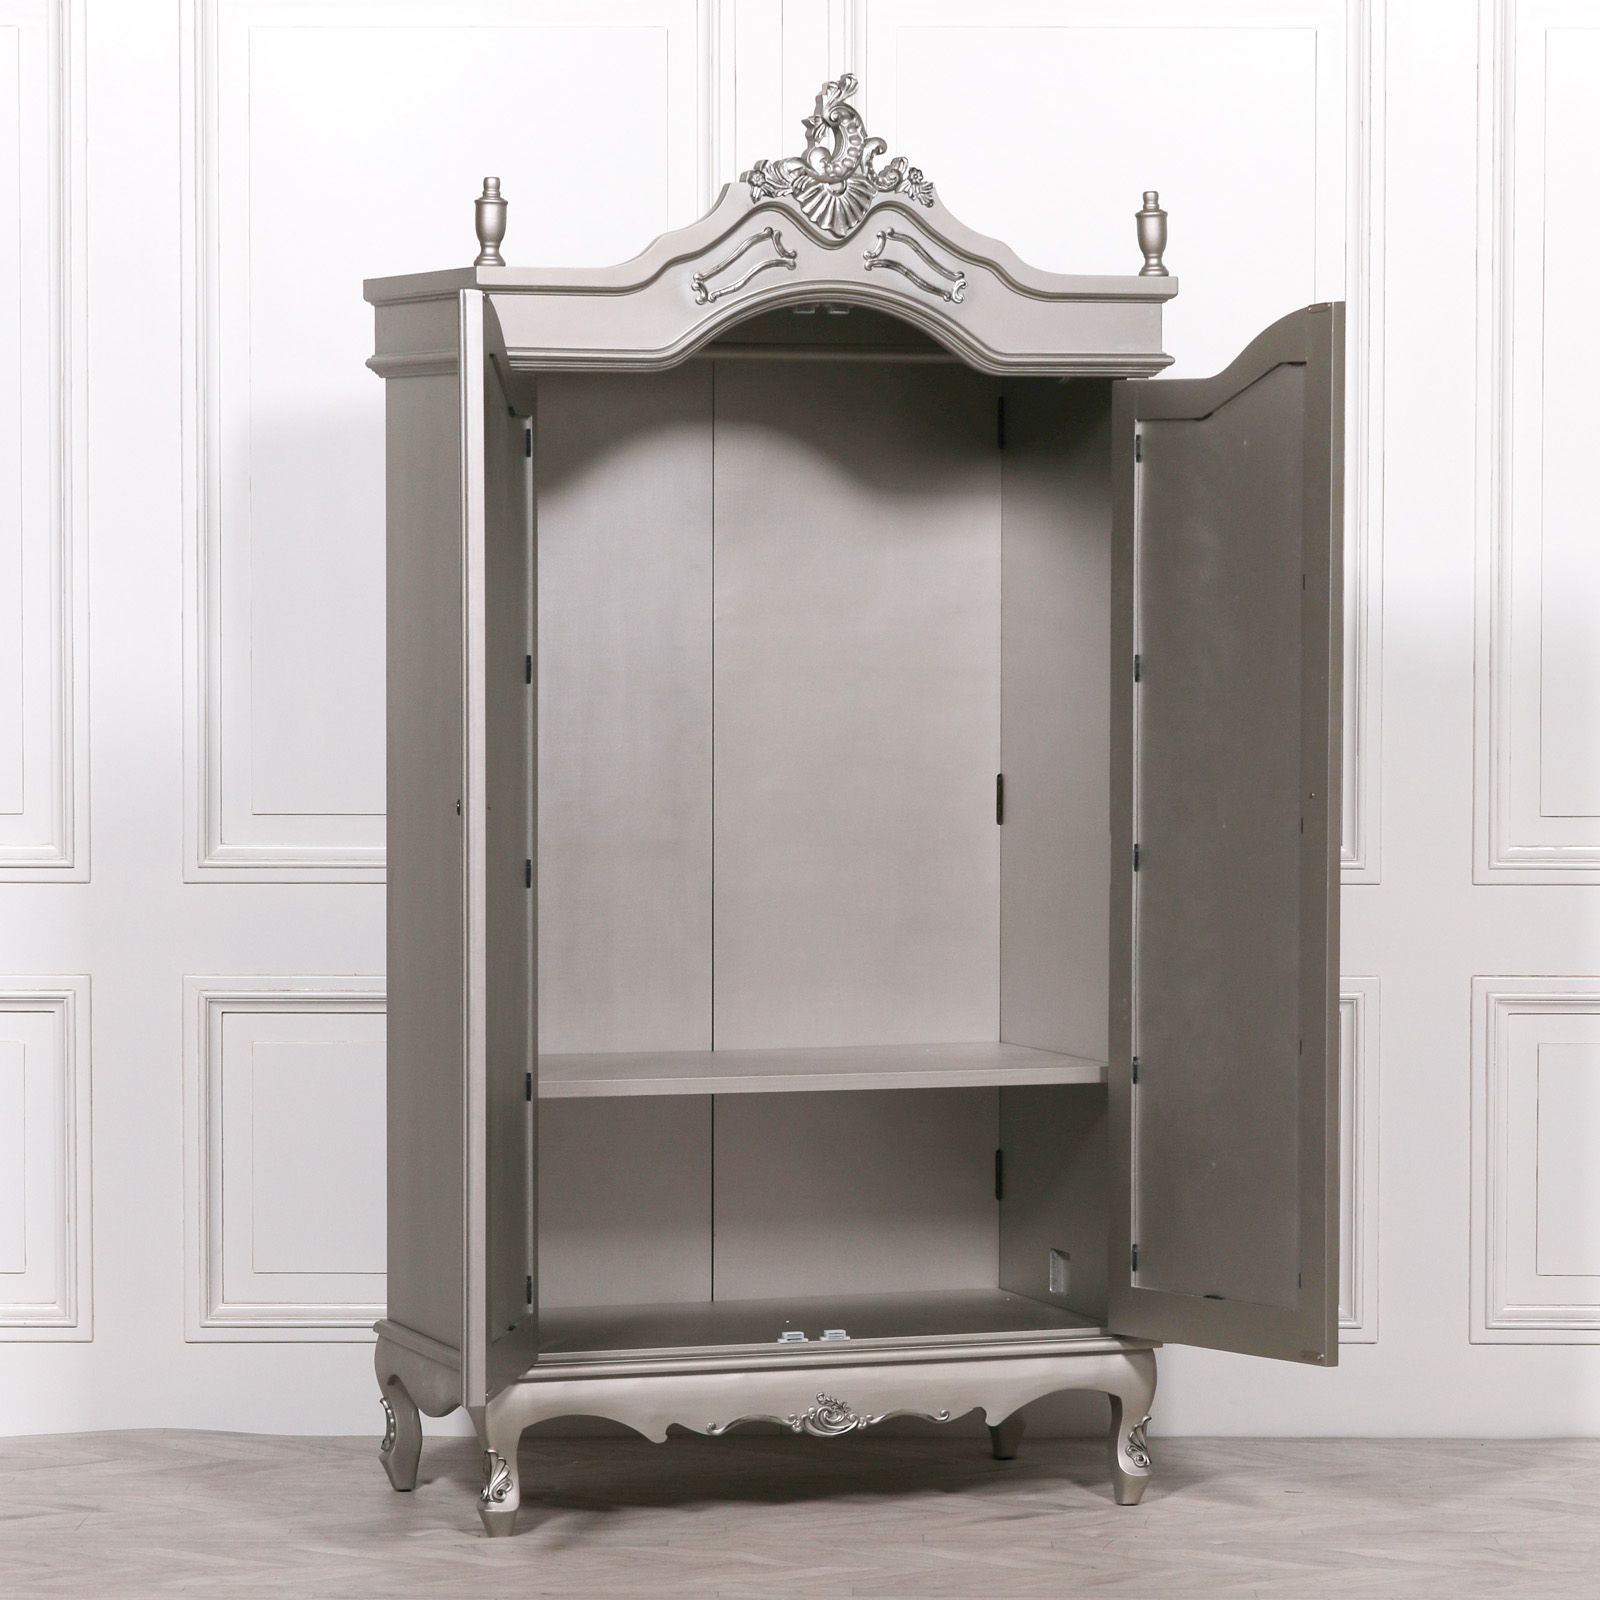 French Style Double Armoire Silver Wardrobe Mirrored Doors Pertaining To Silver French Wardrobes (View 5 of 15)